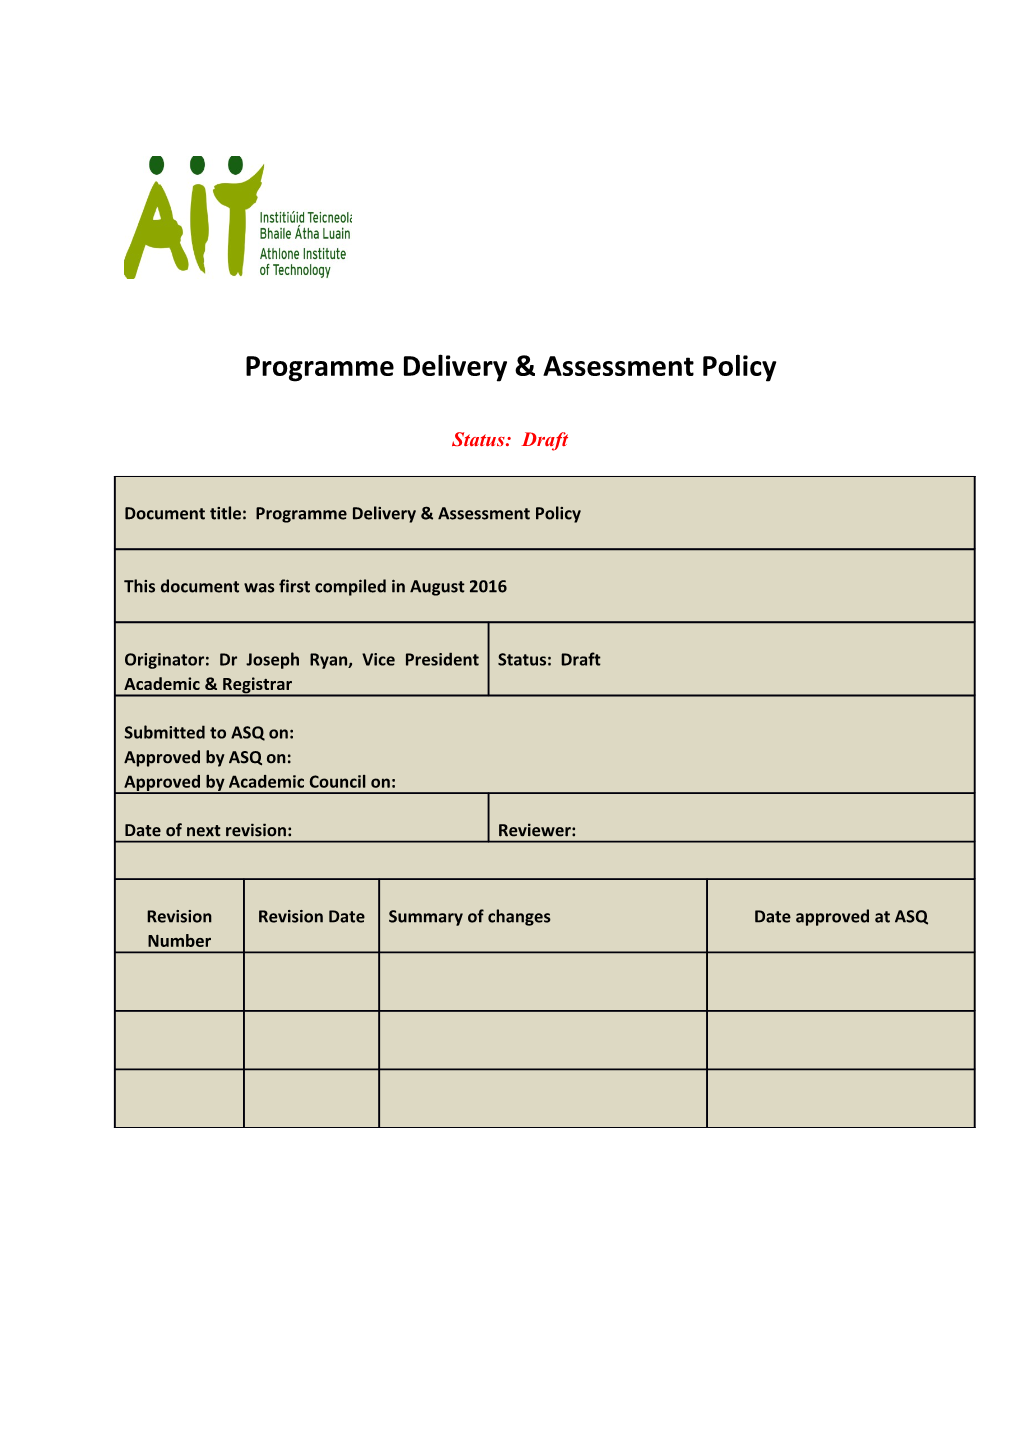 Programme Delivery & Assessment Policy